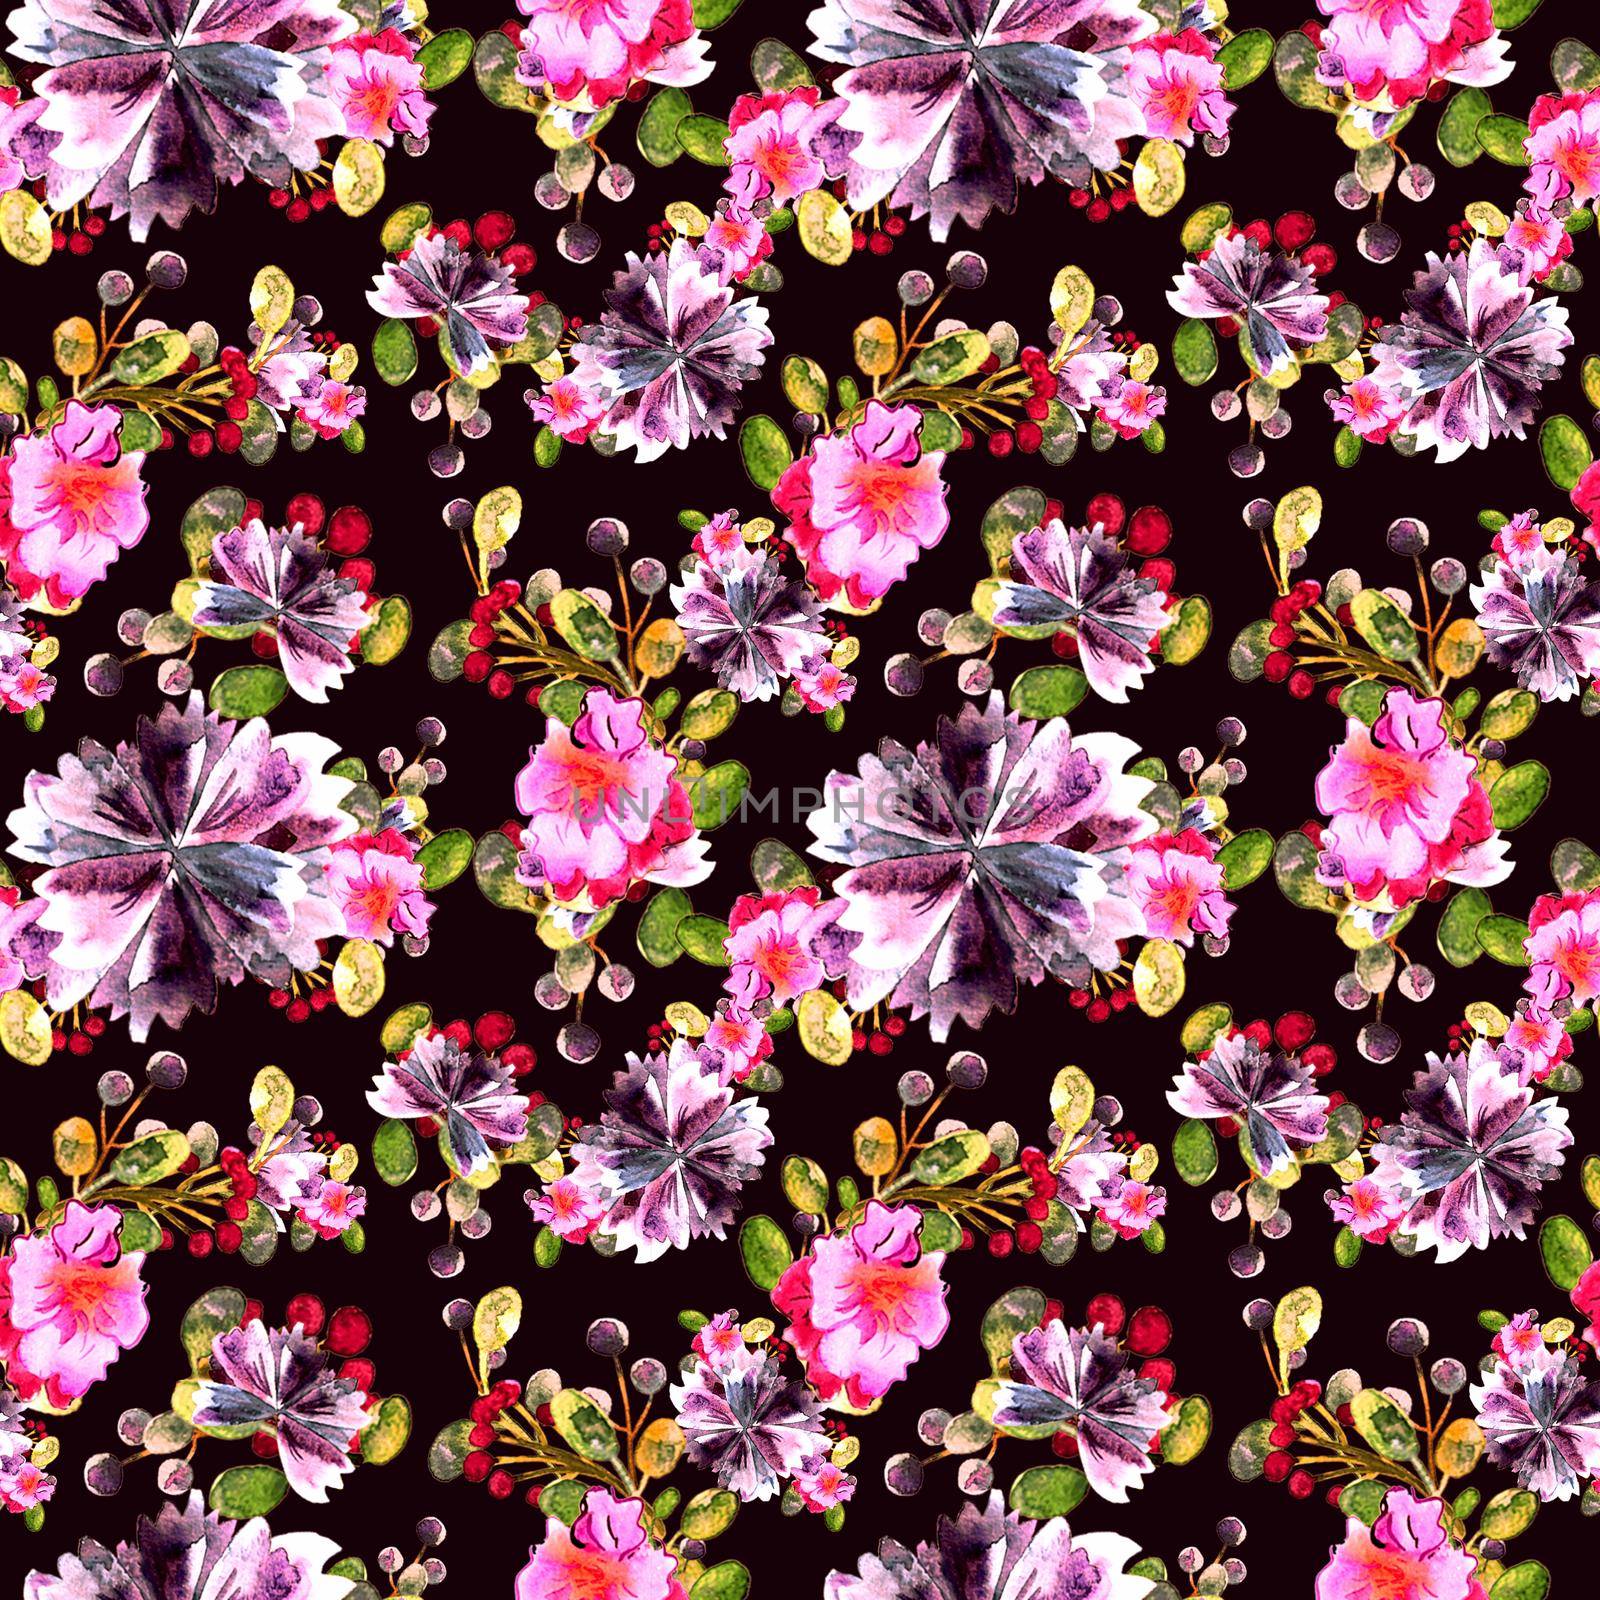 Watercolor floral pattern. Seamless pattern with purple and pink bouquet on white background. Colorful and lovely